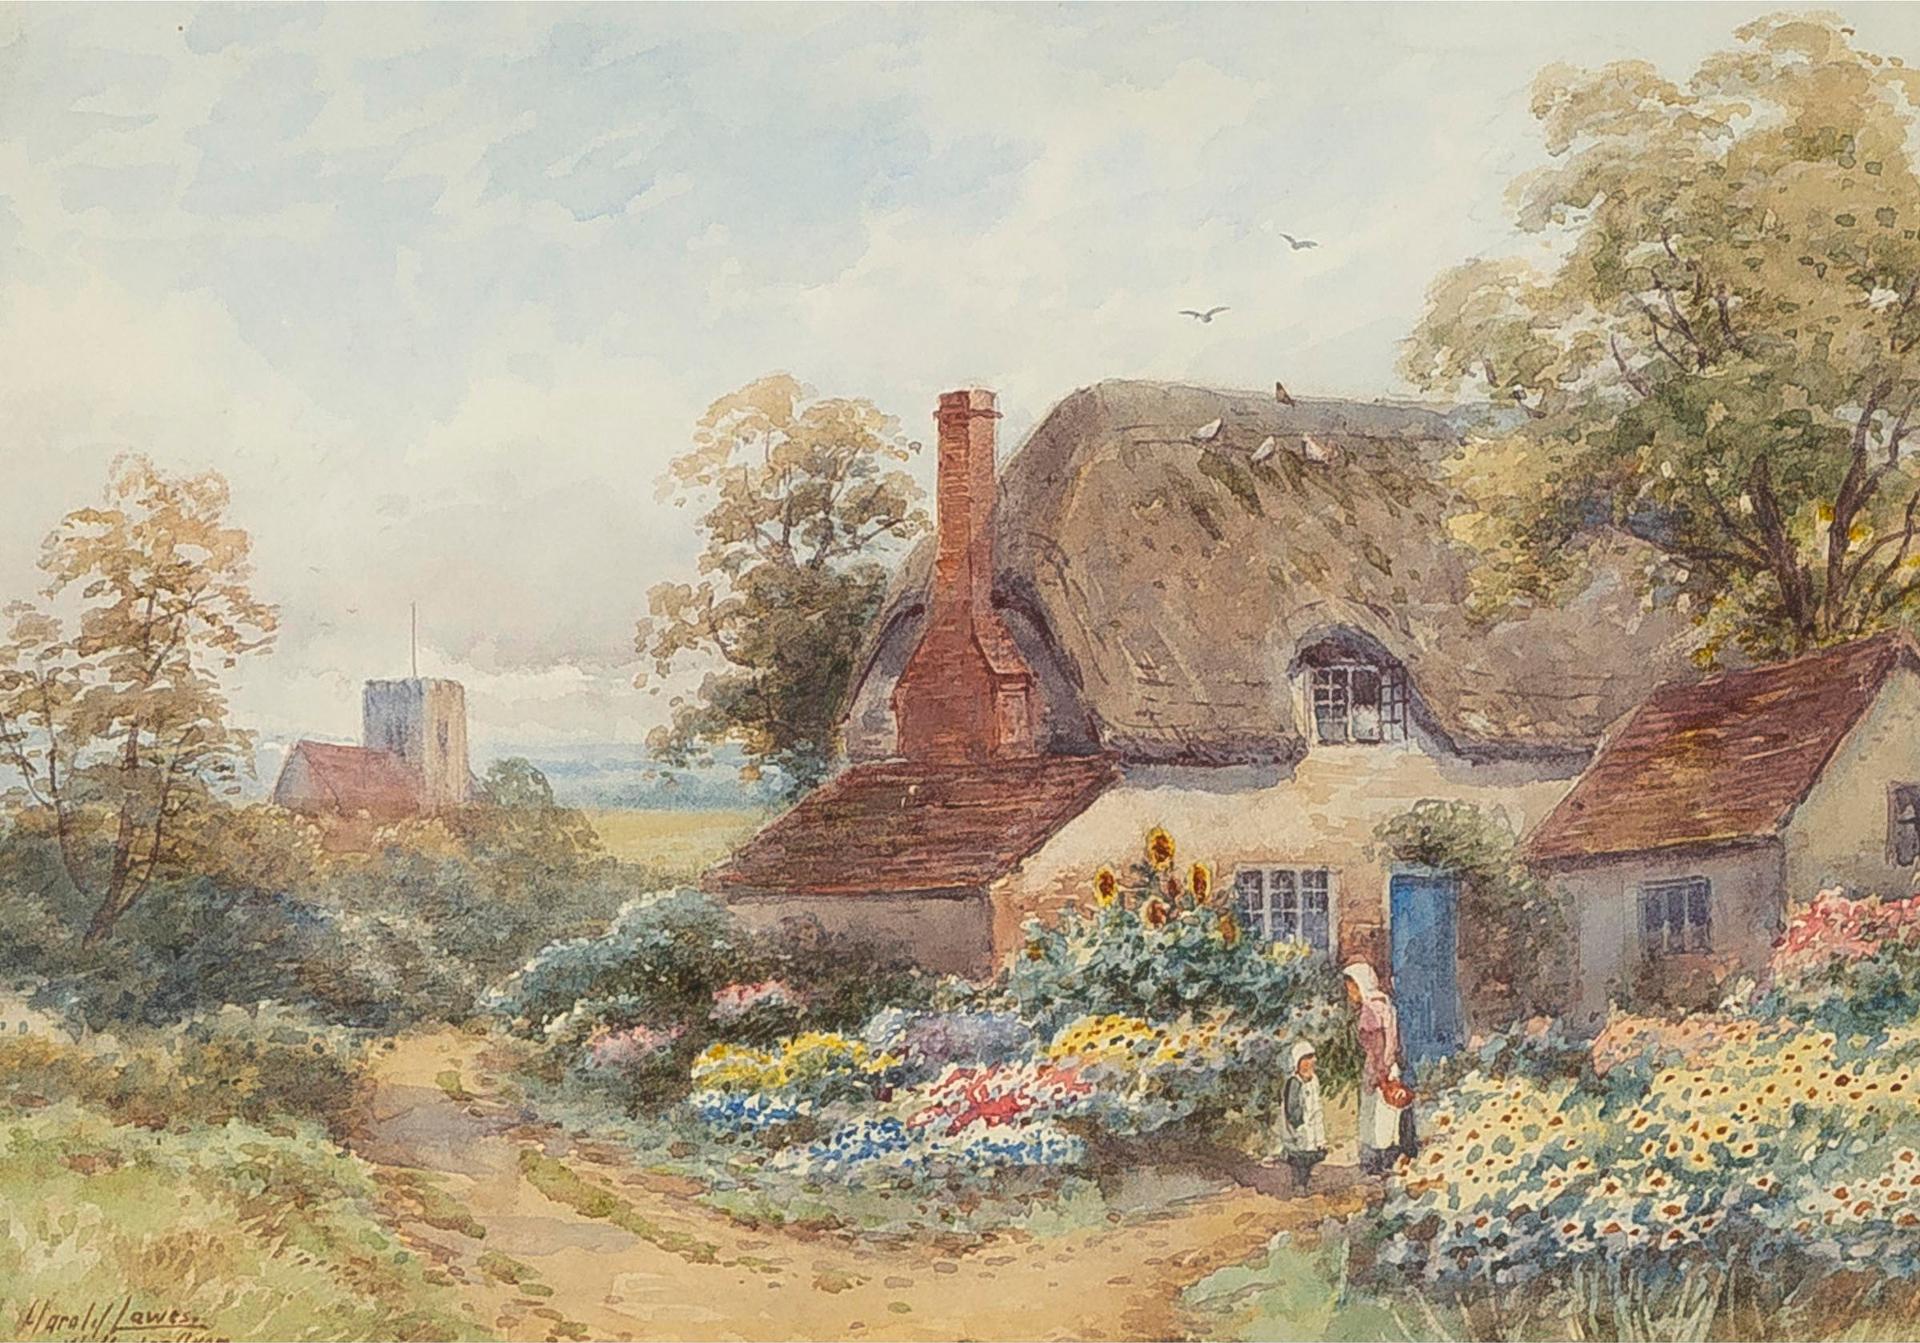 Harold Lawes (1865-1940) - Outside A Thatched Cottage And Garden